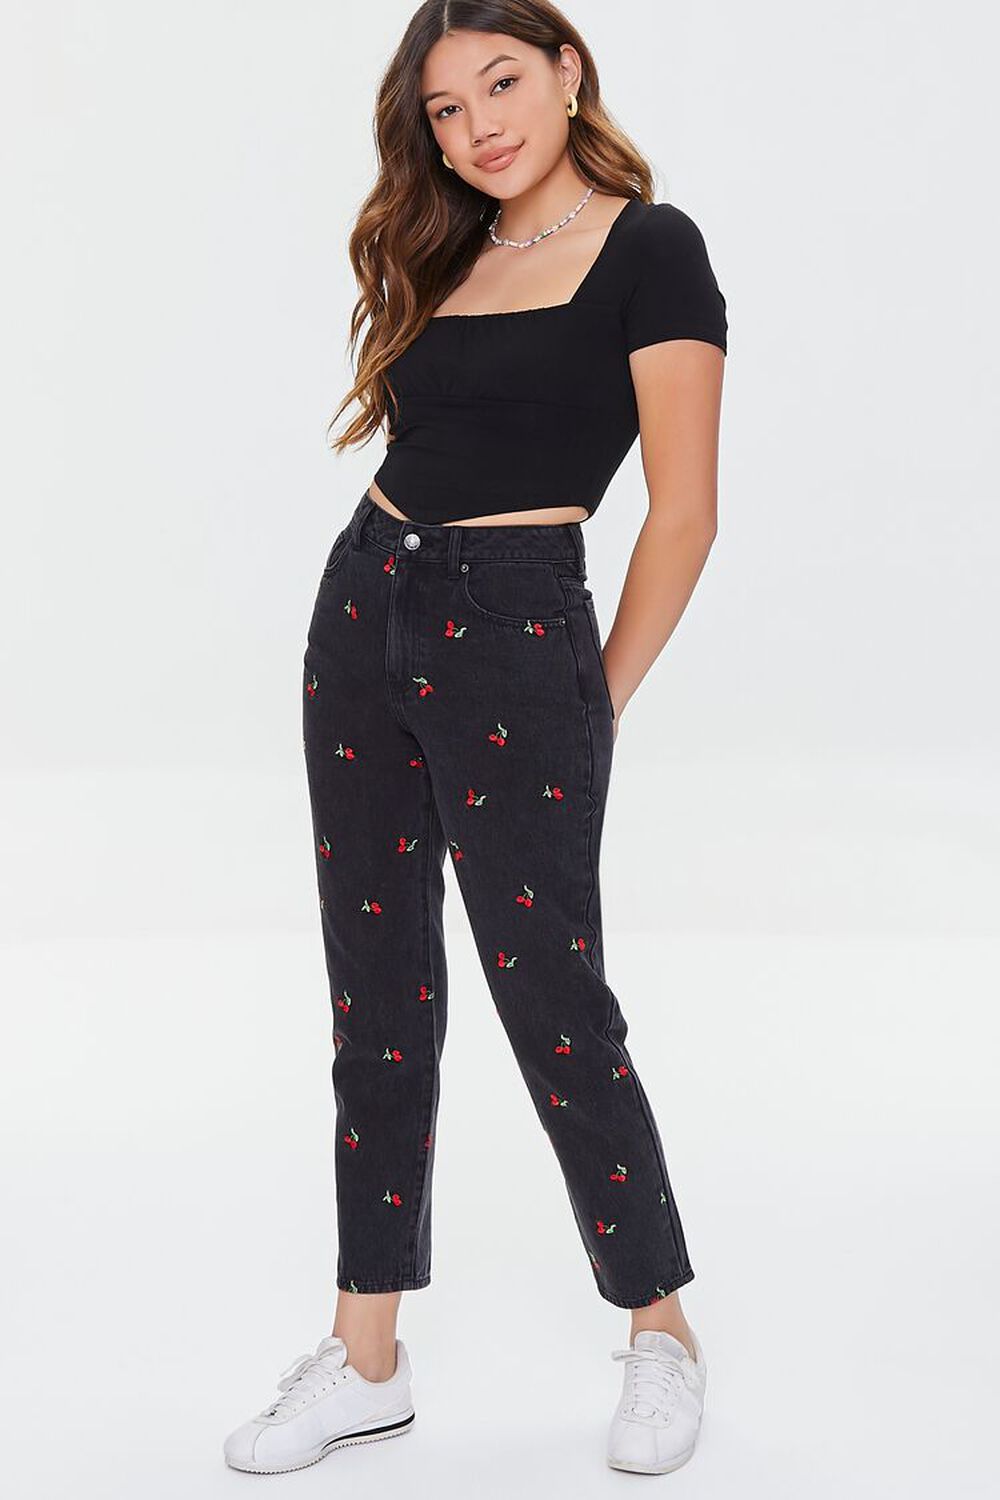 Lots of Cherries Jeans Prism Collection